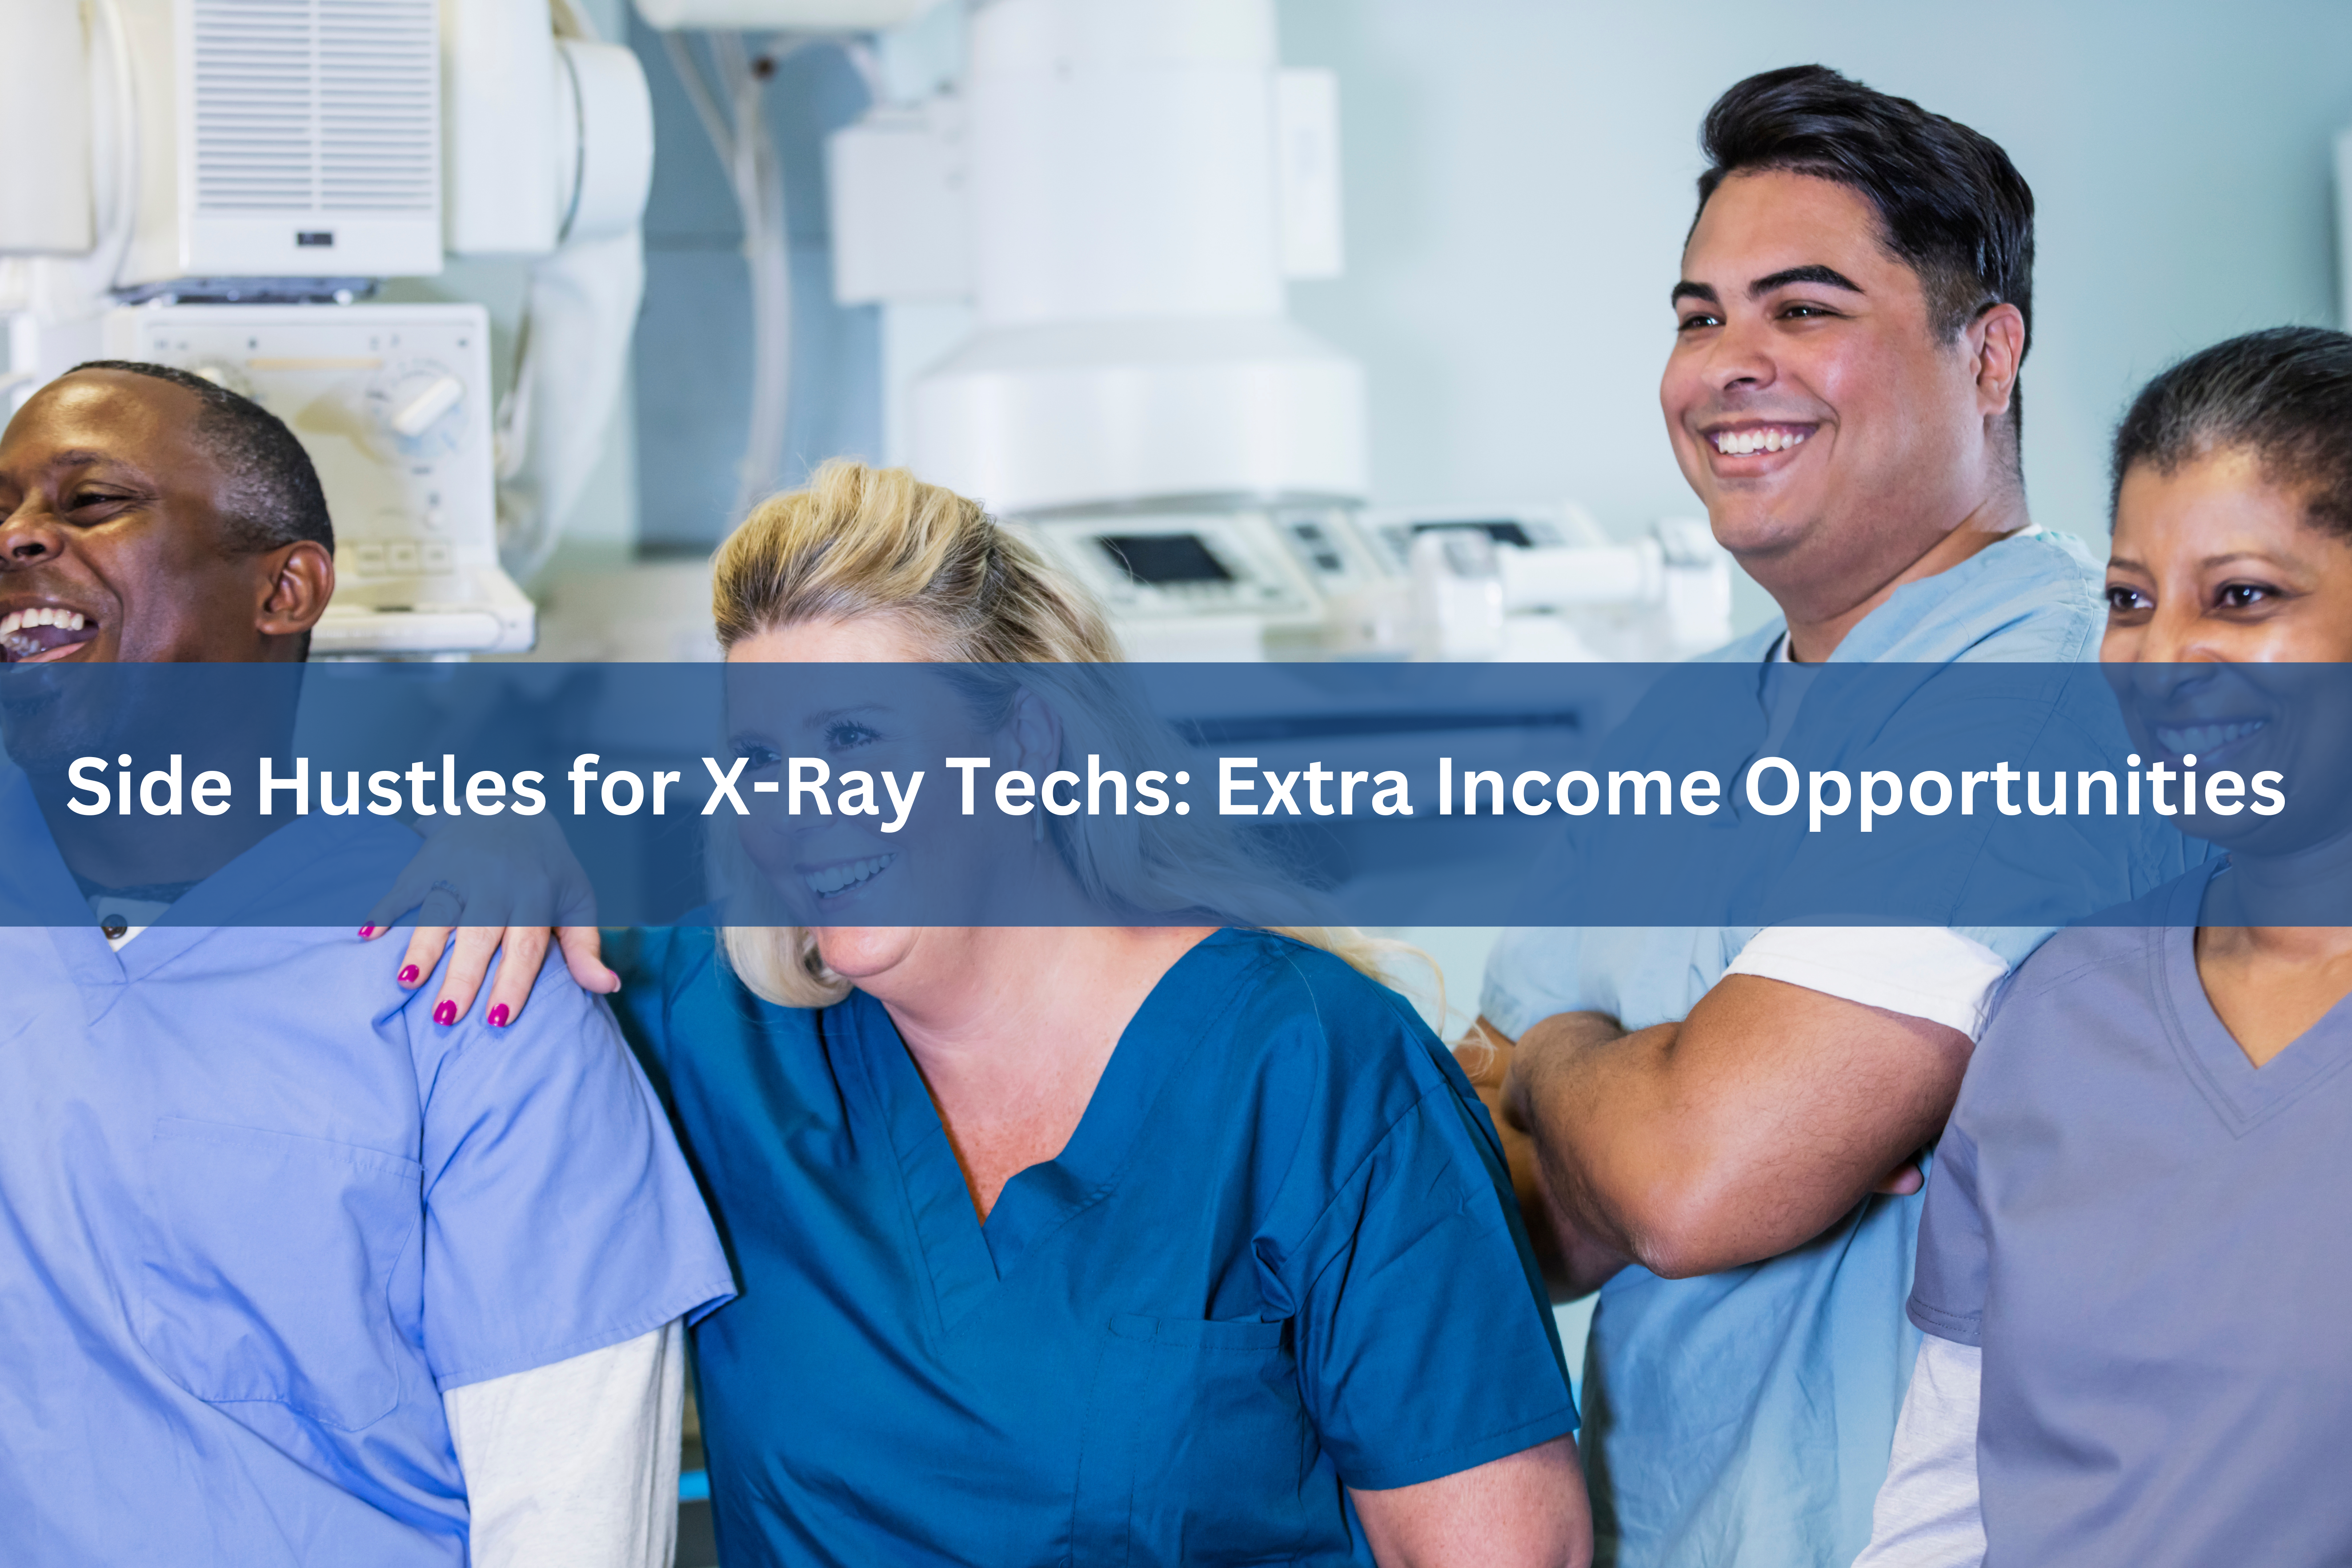 Side Hustles for X-Ray Techs